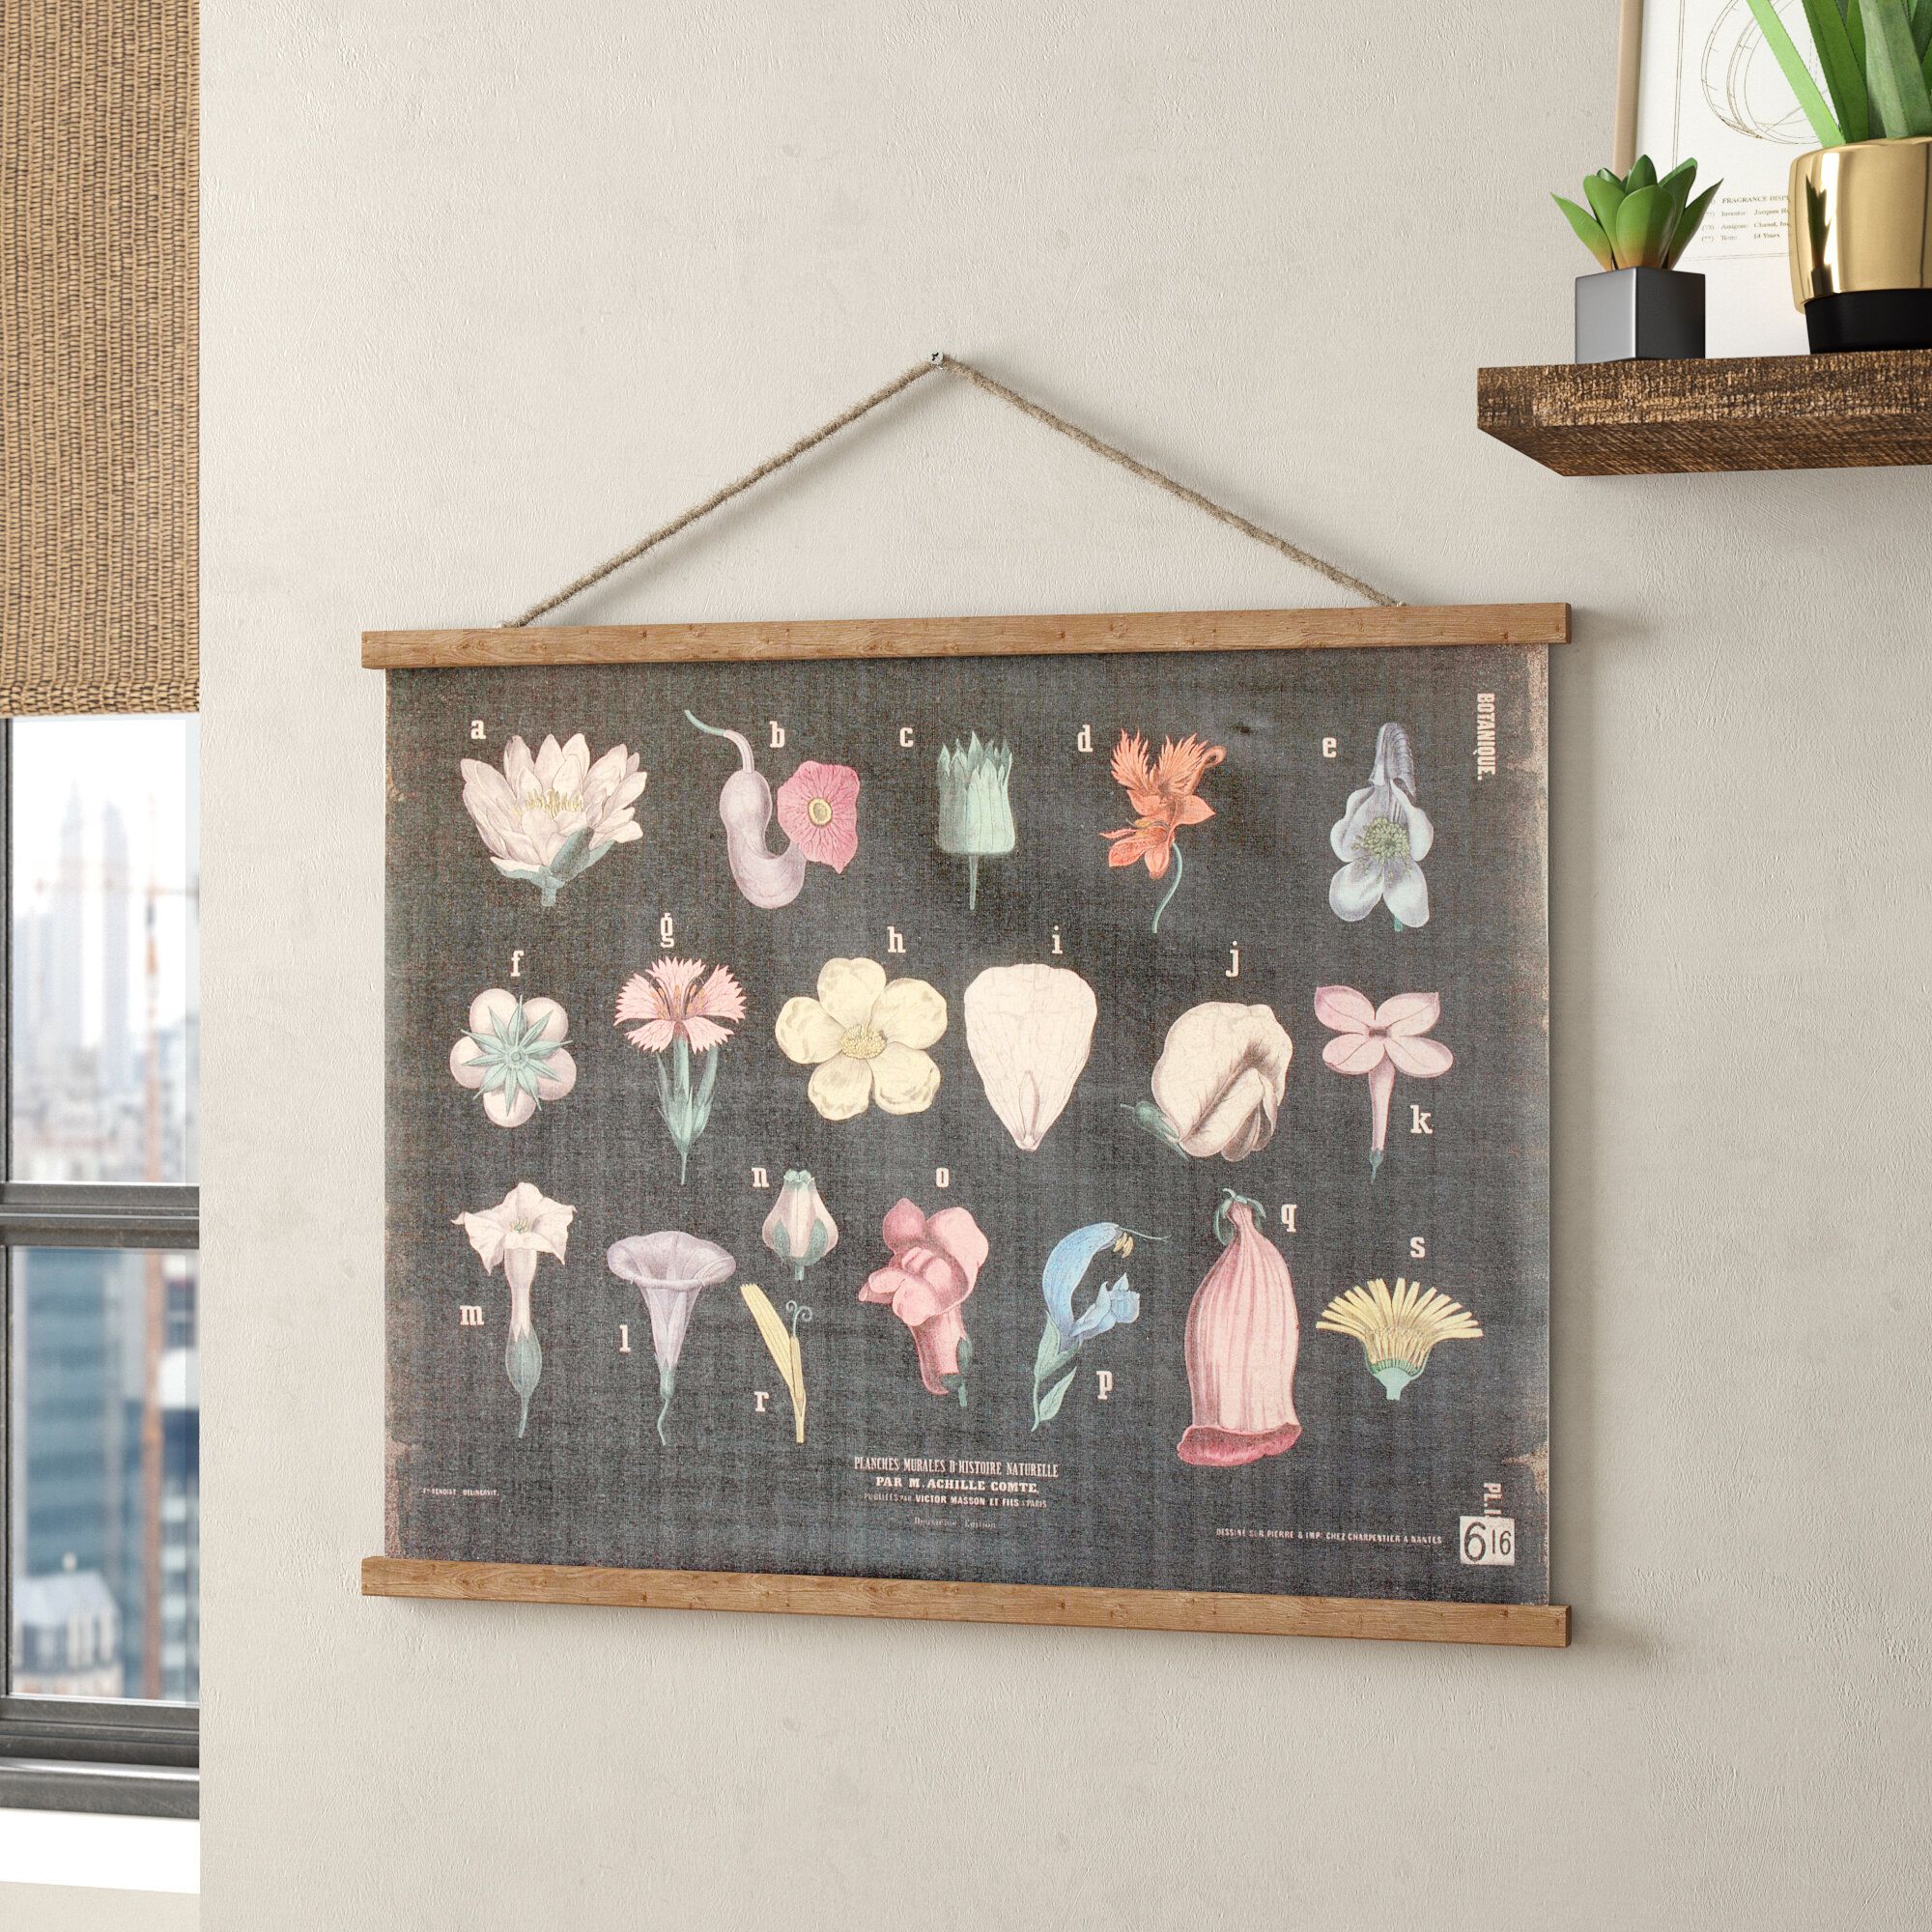 Rod Tapestries You'll Love In 2021 | Wayfair Pertaining To Recent Blended Fabric Fruity Bouquets Wall Hangings (View 1 of 20)